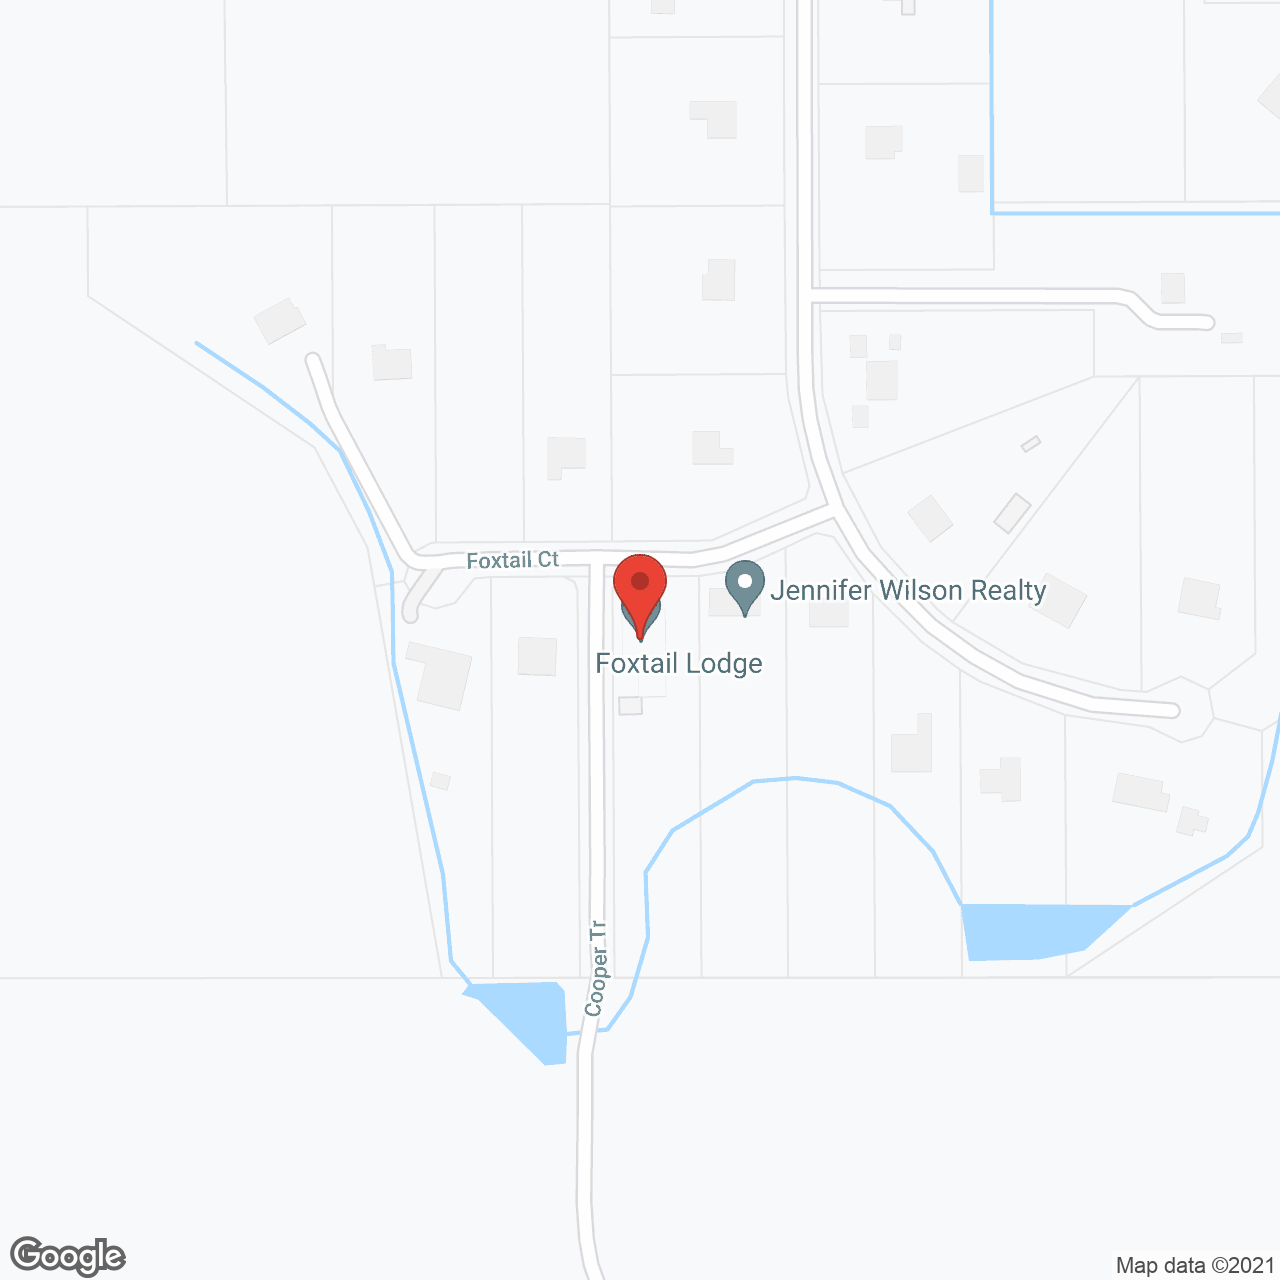 Foxtail Lodge in google map